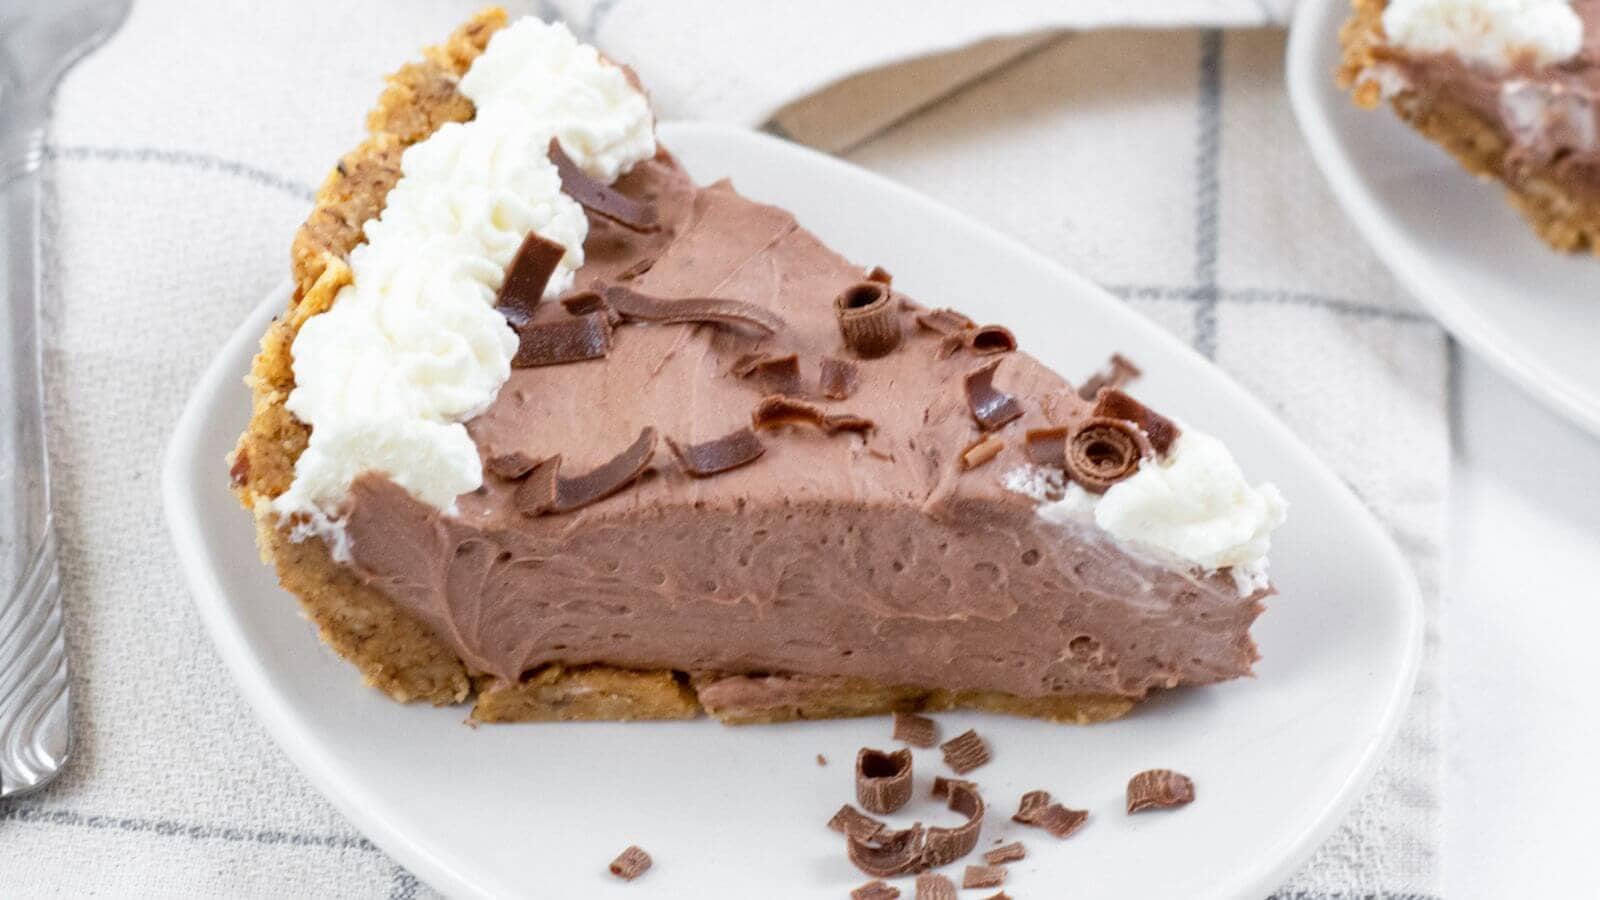 A slice of keto chocolate pudding pie on a plate.